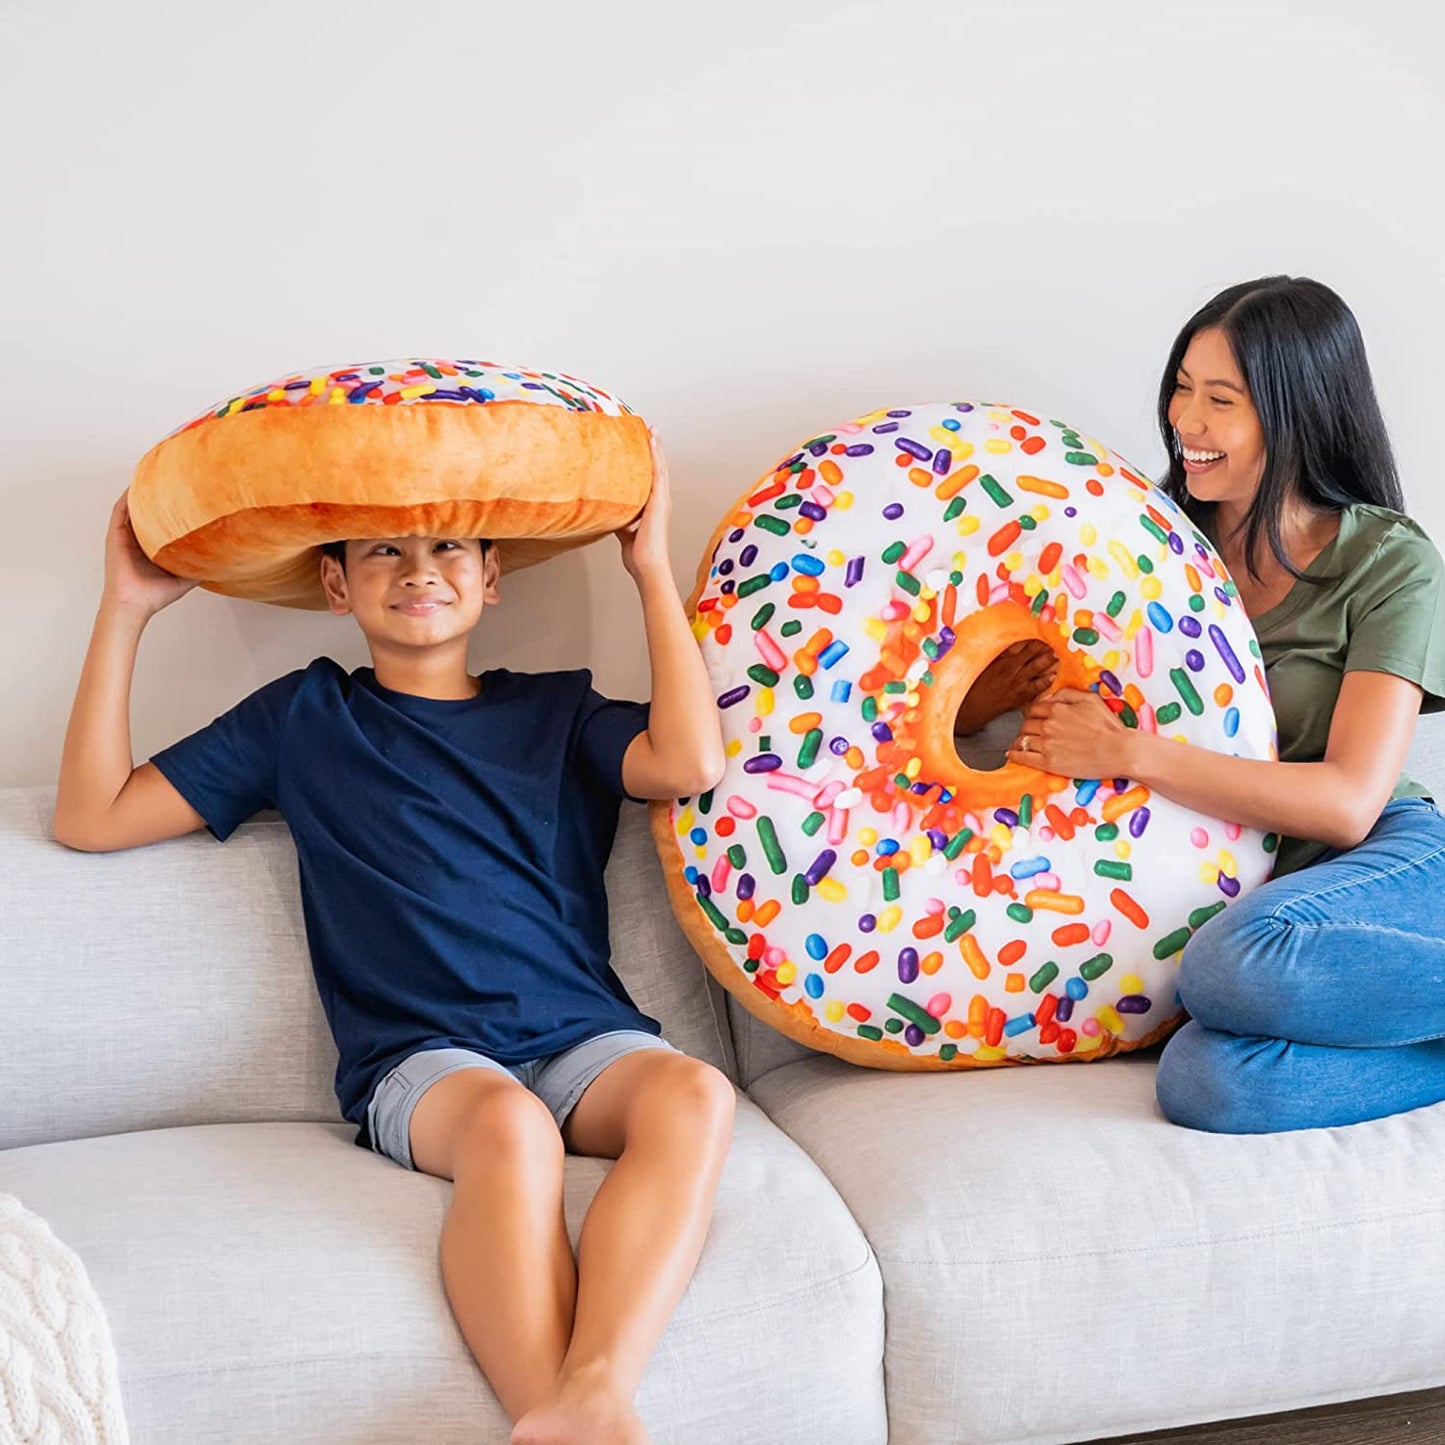 A child and woman are playing with two donut shaped pillows.